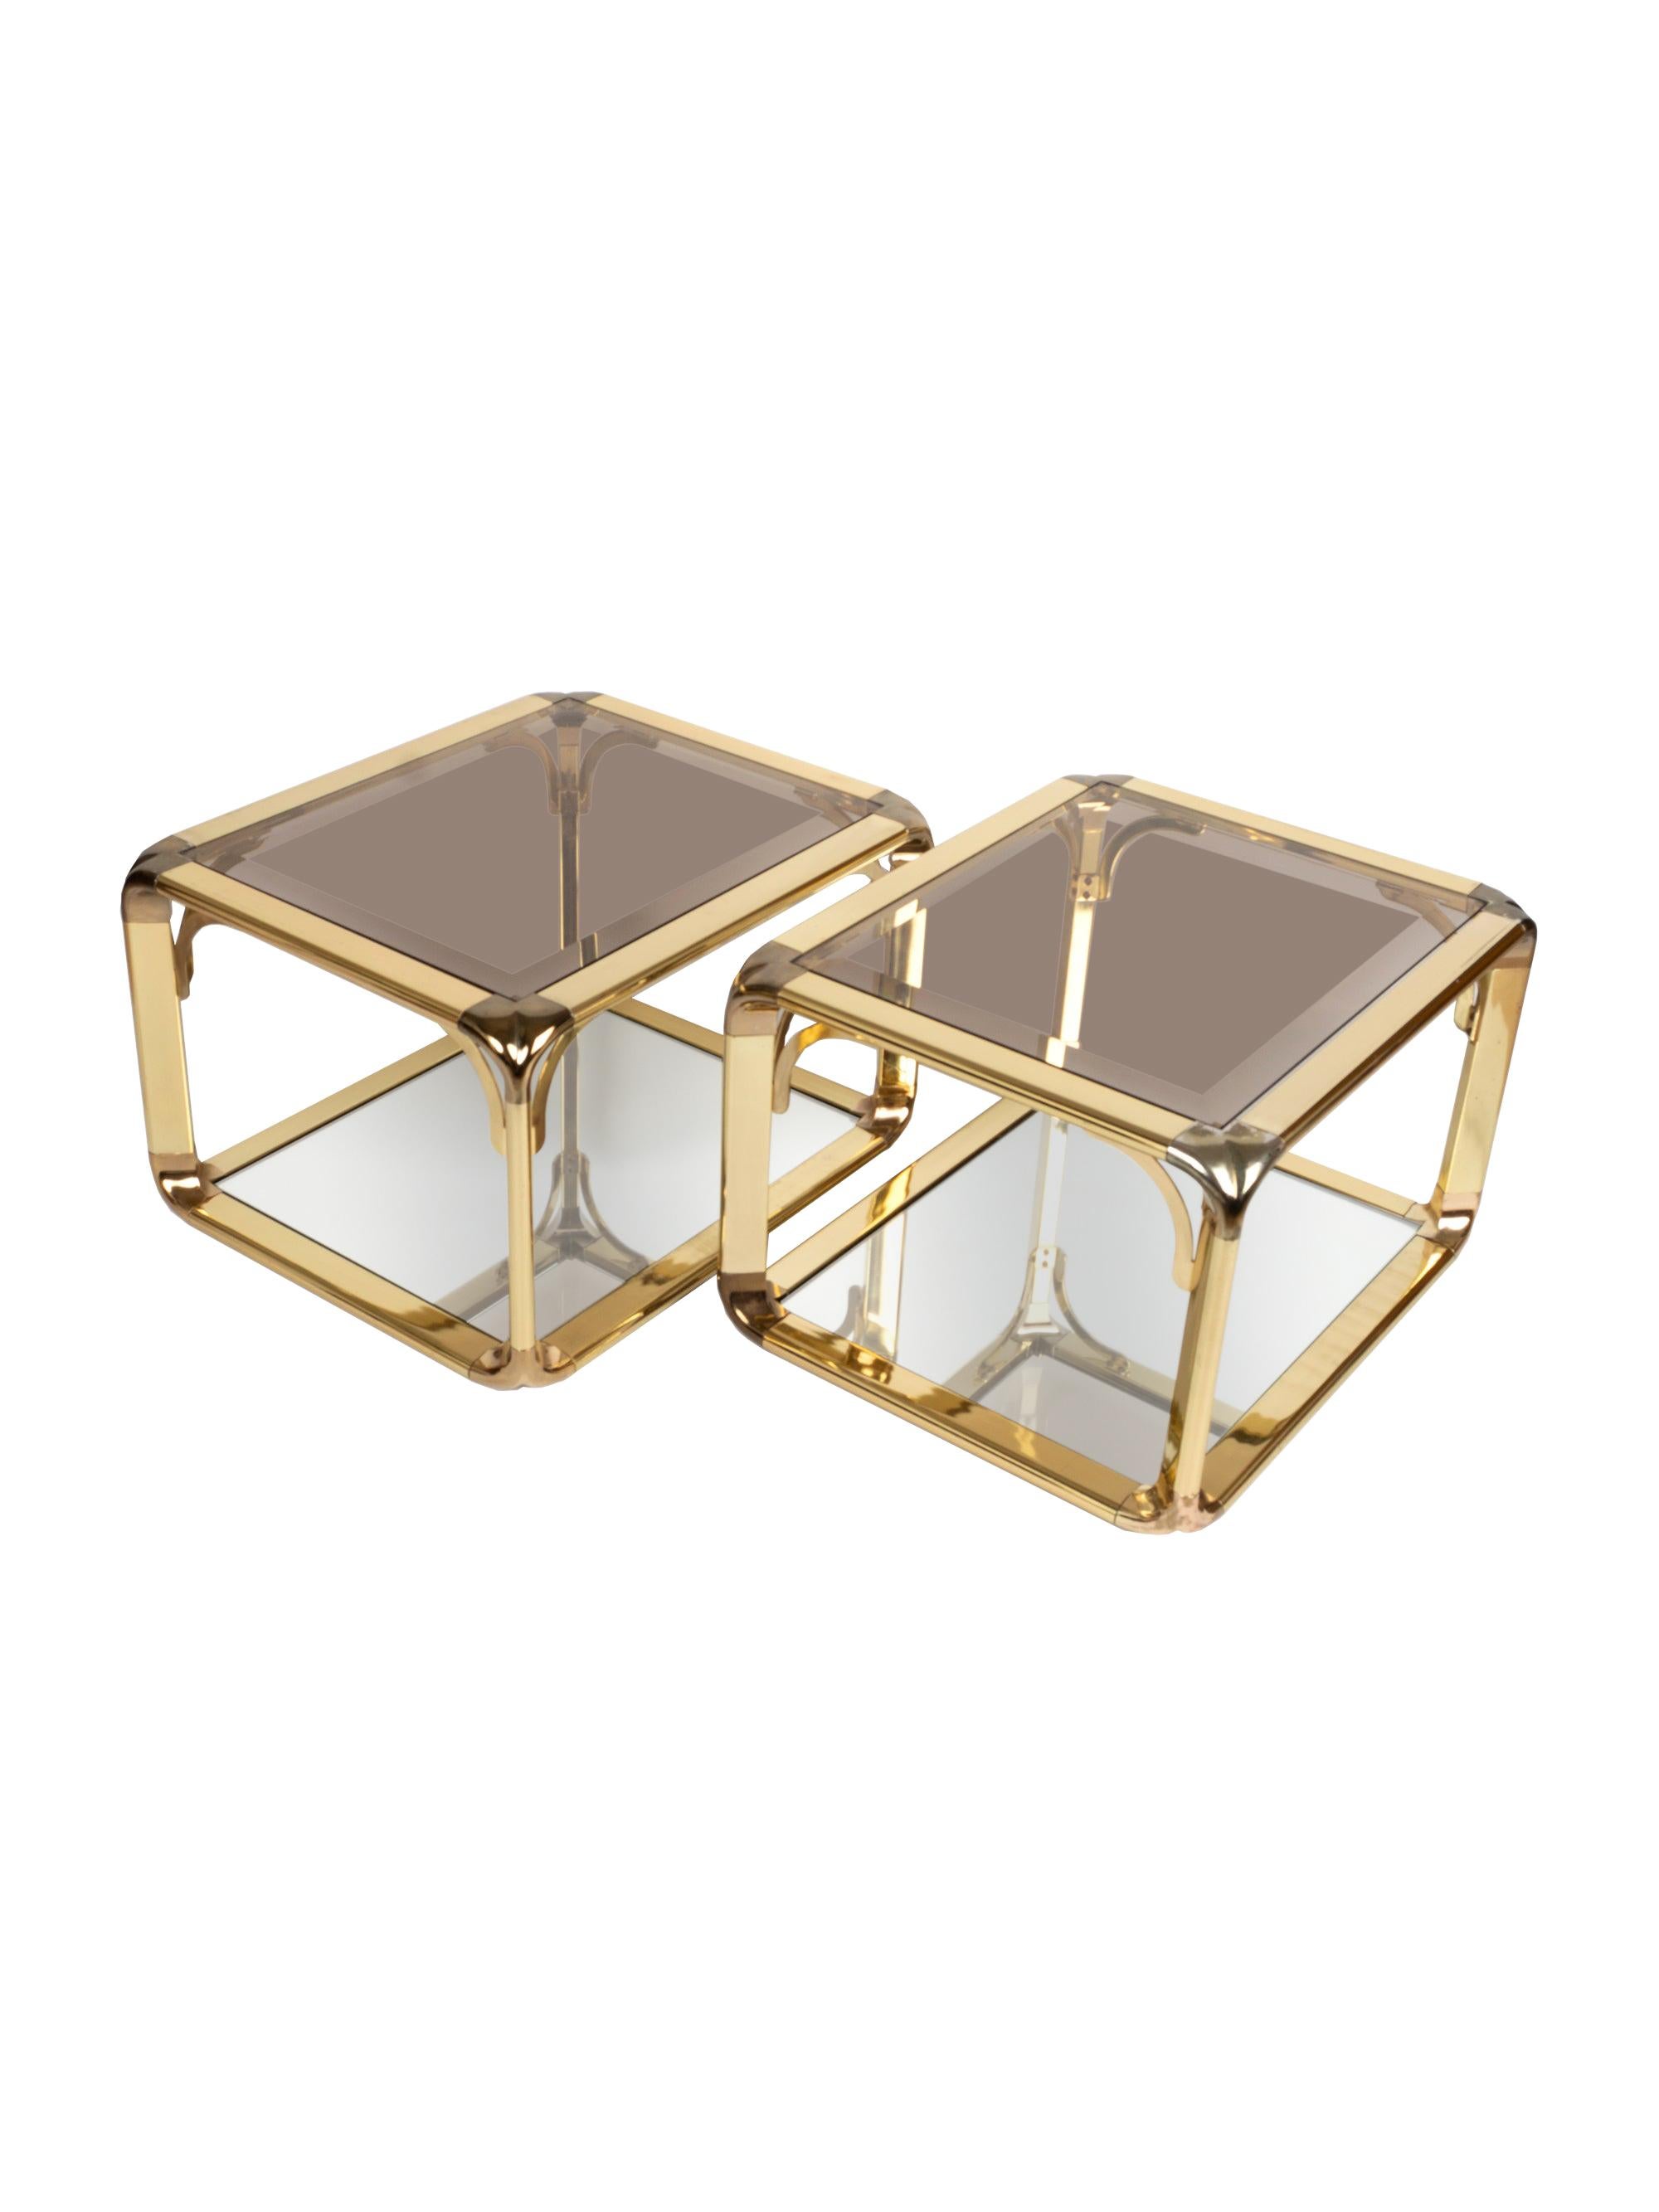 Pair of Mirrored Gold Chrome End Tables / Side Tables, Belgium, circa 1970 For Sale